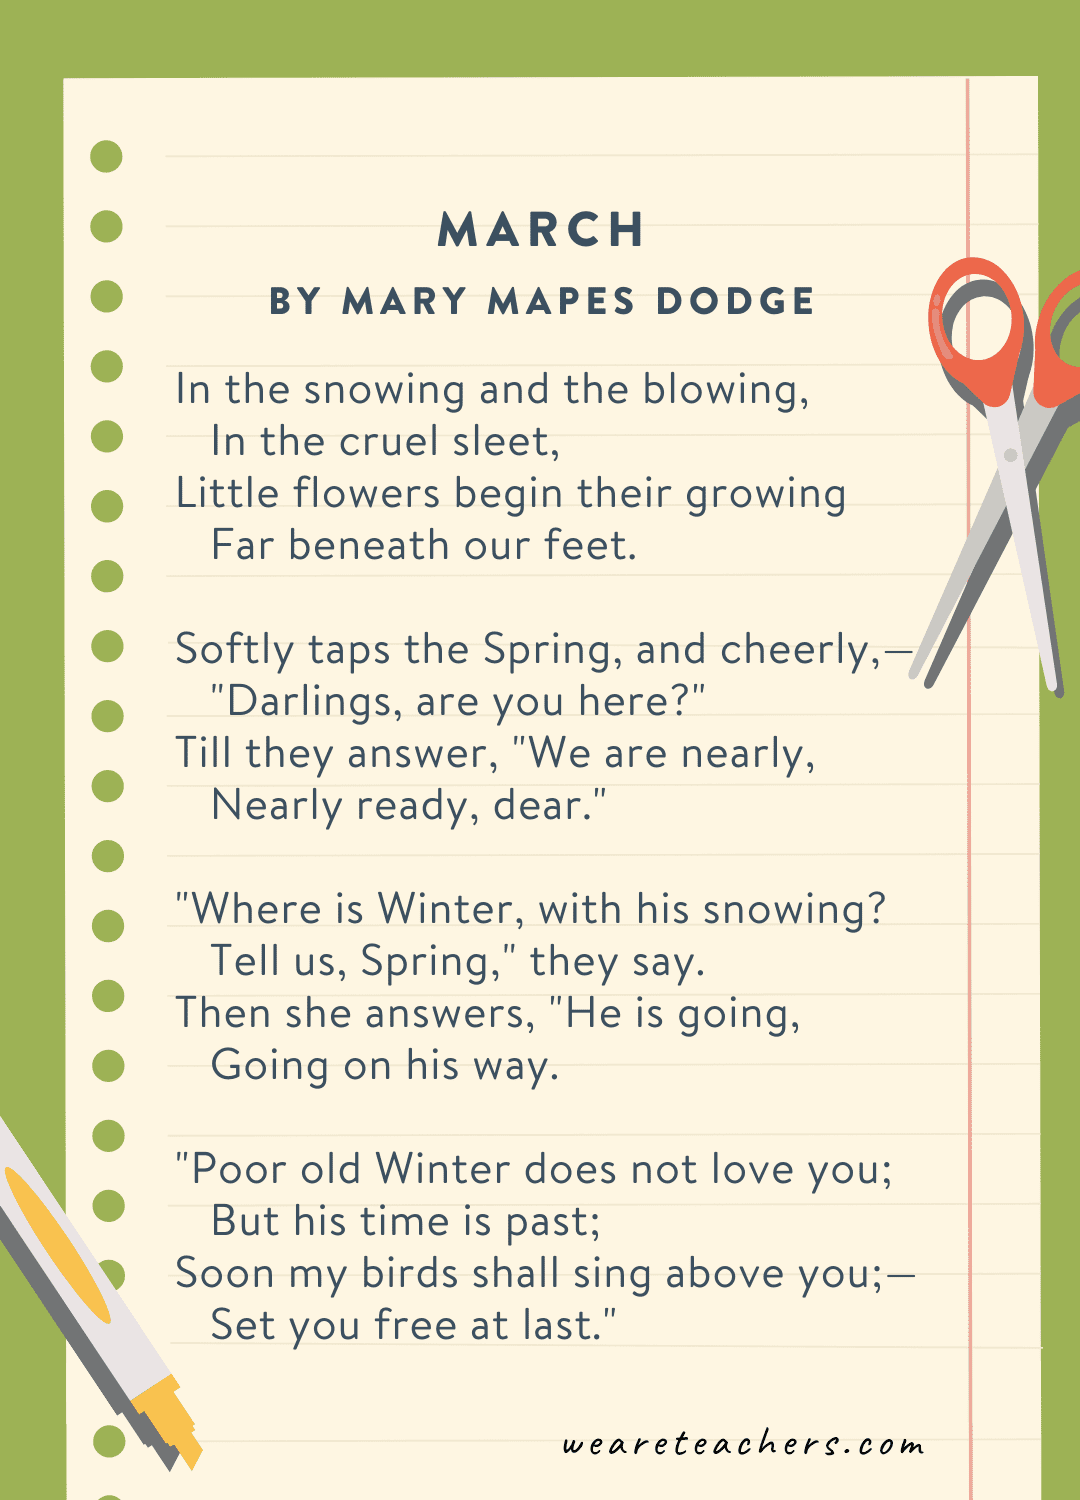 3rd Grade Poems for All Reading Levels That Students Will Love!